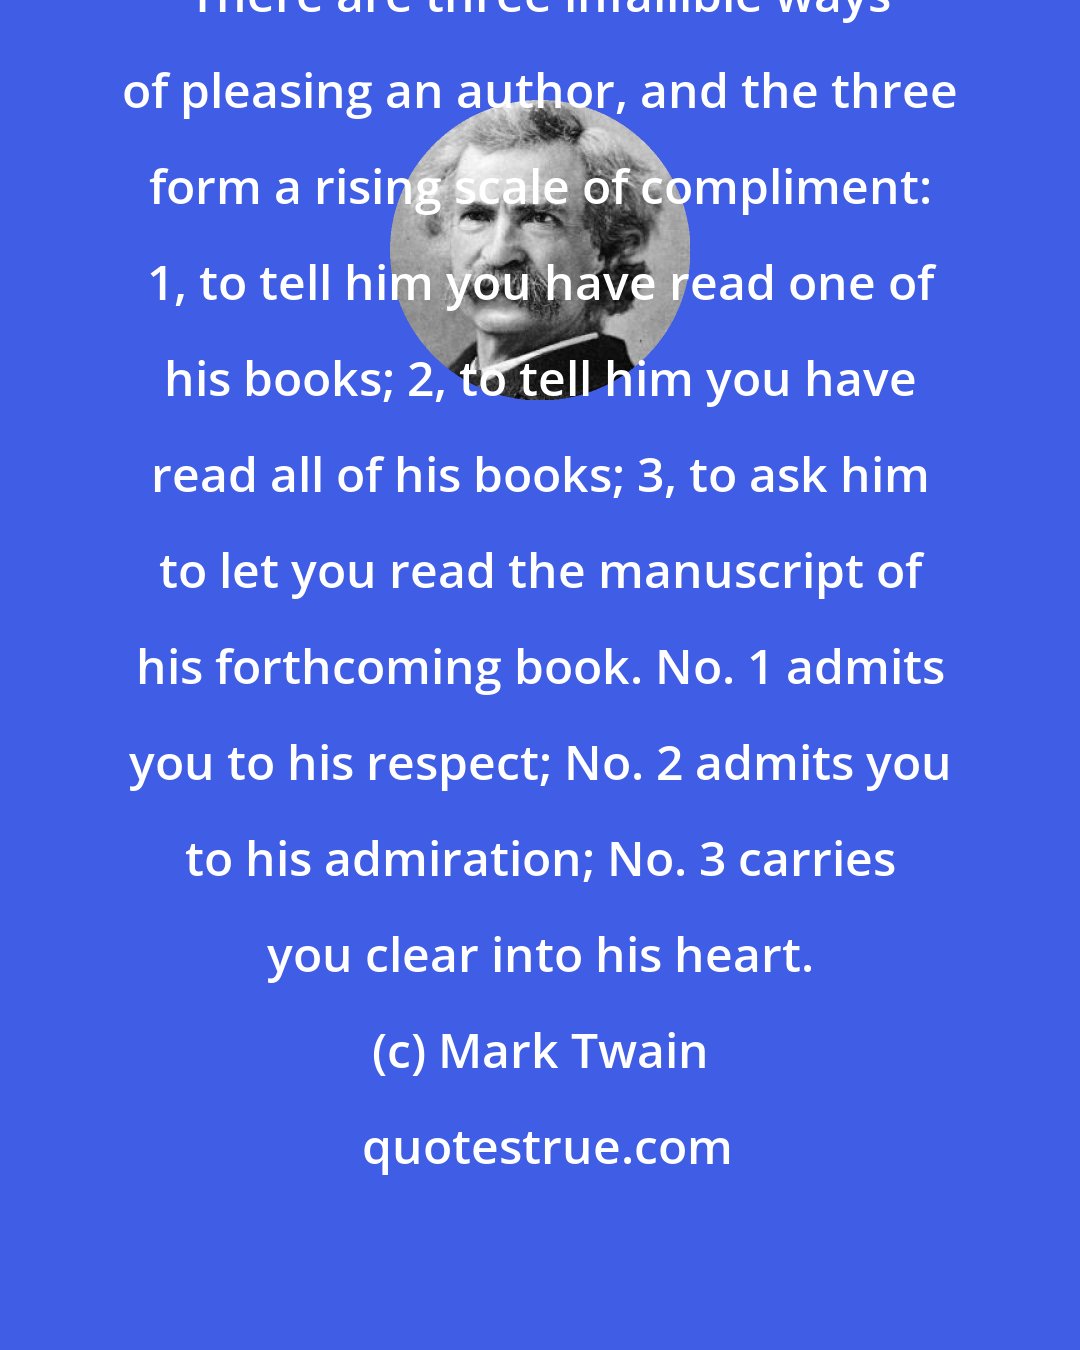 Mark Twain: There are three infallible ways of pleasing an author, and the three form a rising scale of compliment: 1, to tell him you have read one of his books; 2, to tell him you have read all of his books; 3, to ask him to let you read the manuscript of his forthcoming book. No. 1 admits you to his respect; No. 2 admits you to his admiration; No. 3 carries you clear into his heart.